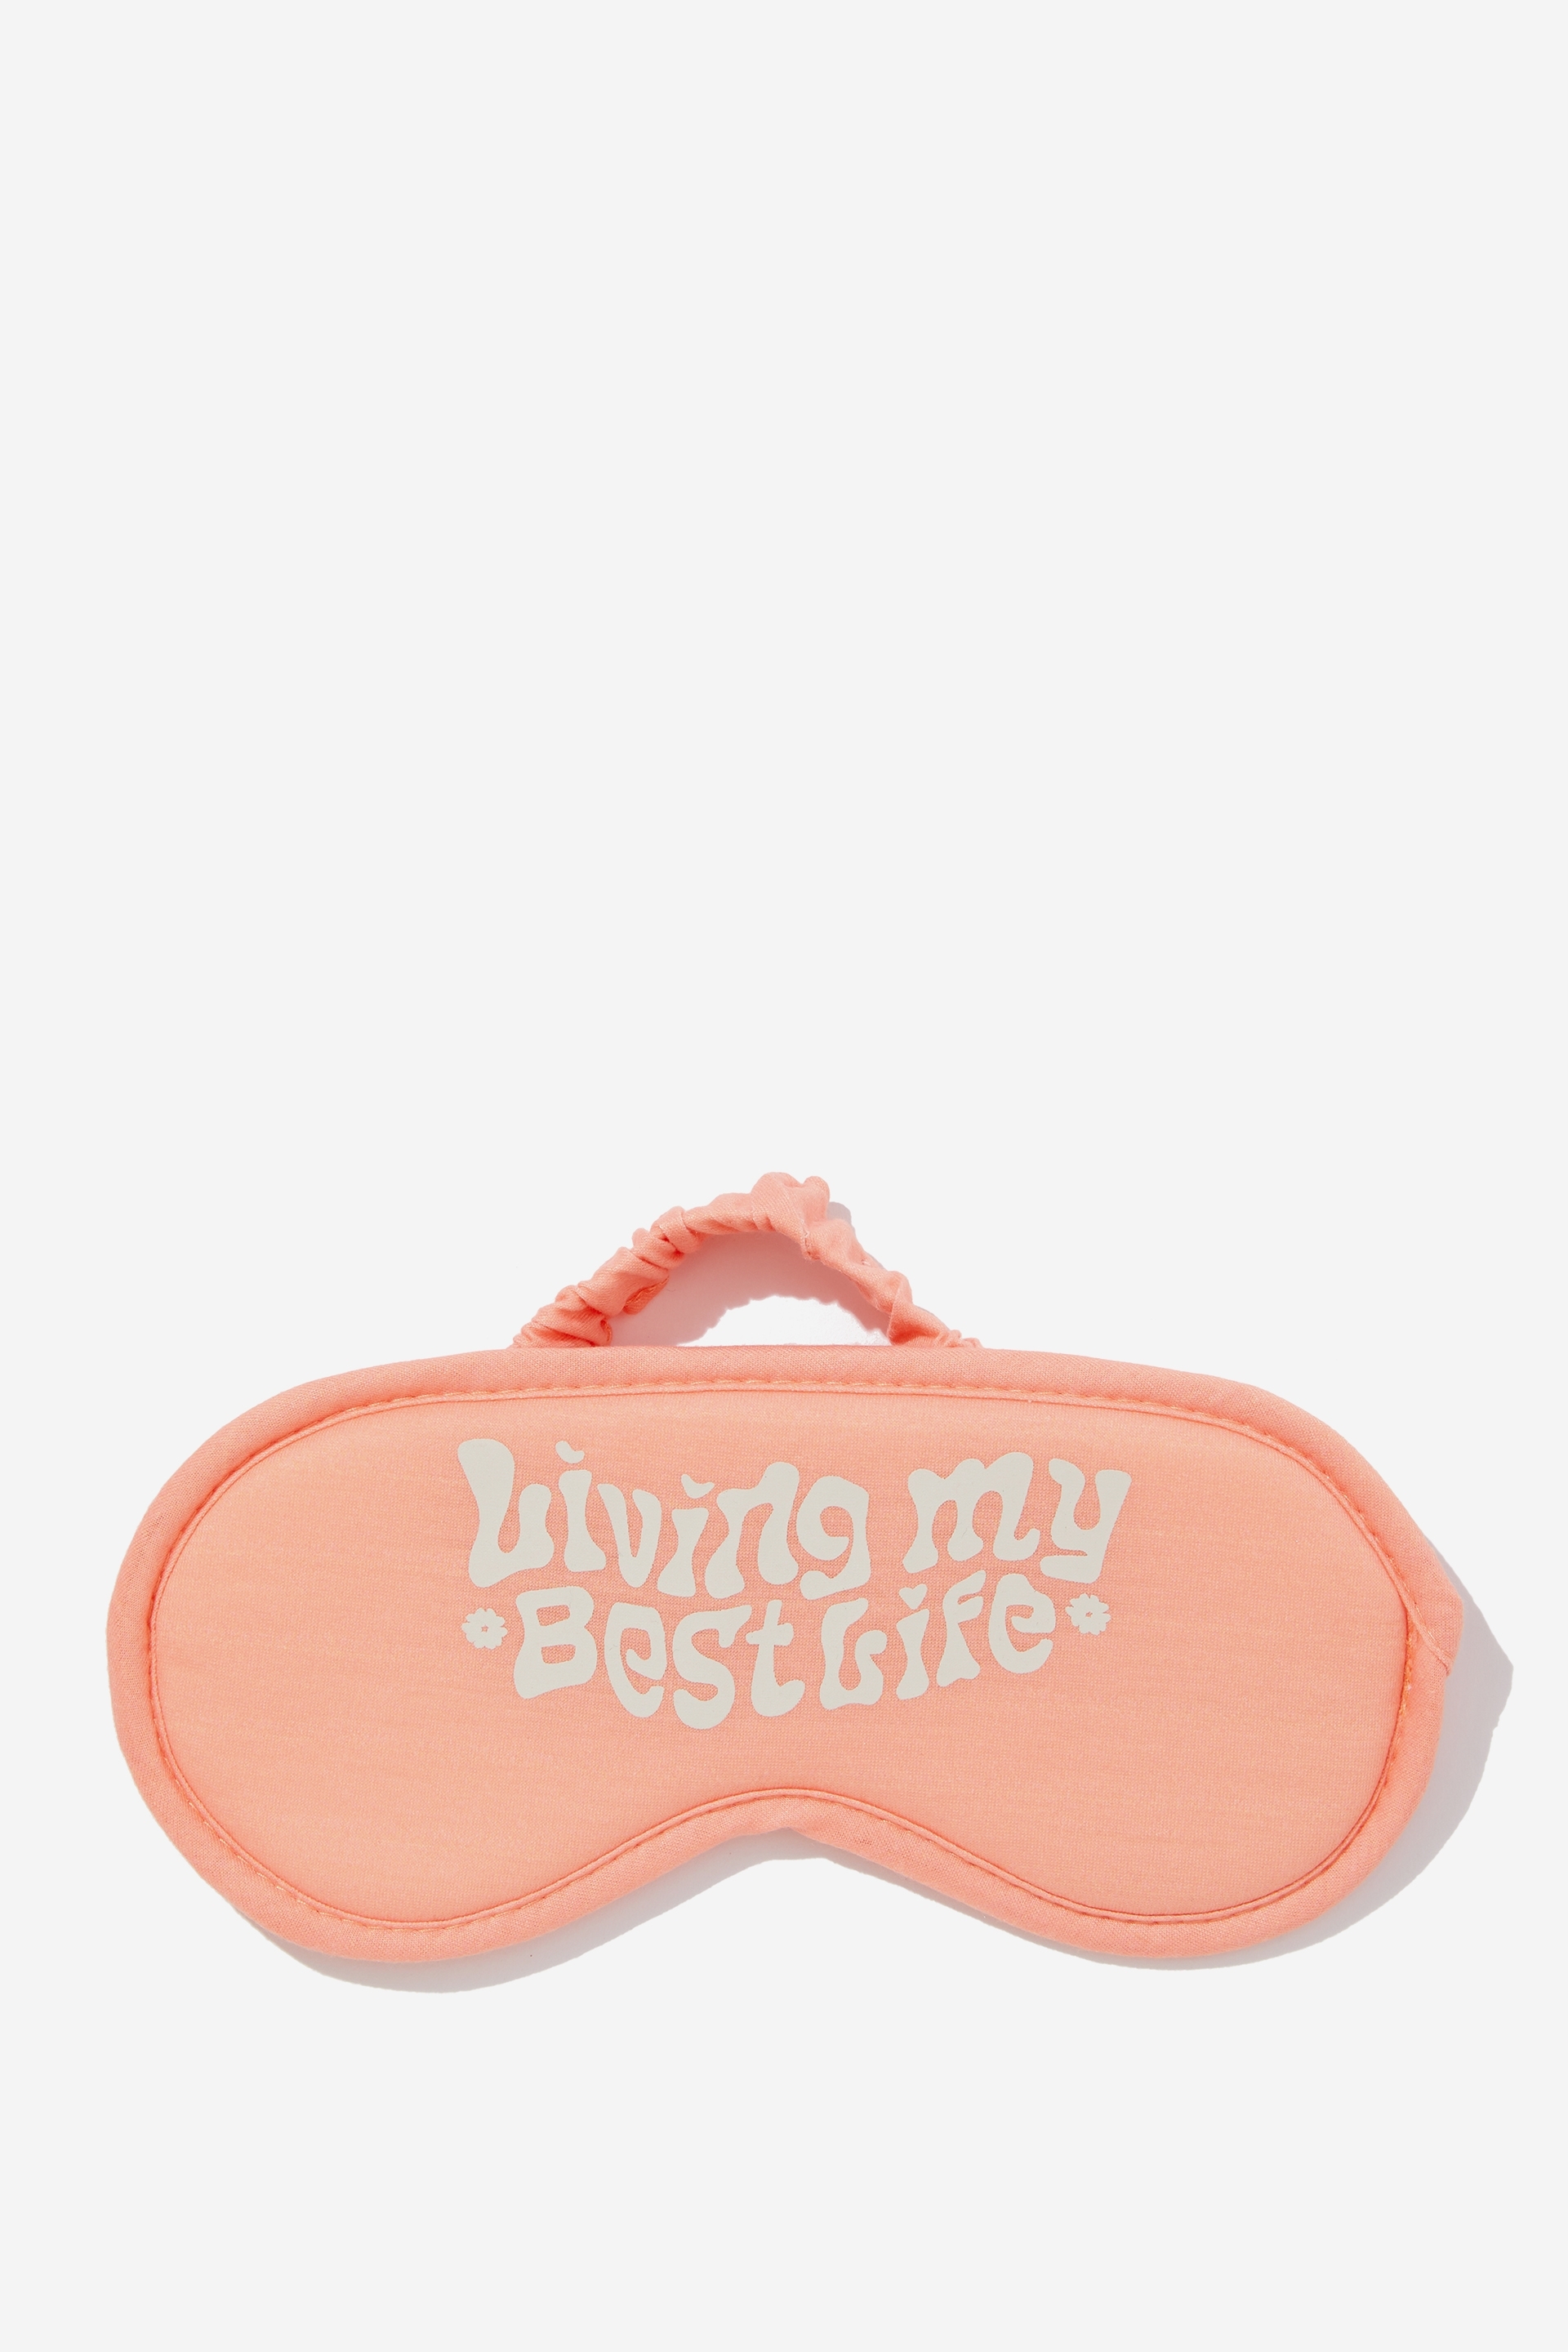 Typo - Off The Grid Eyemask - Living my best life / apricot crush